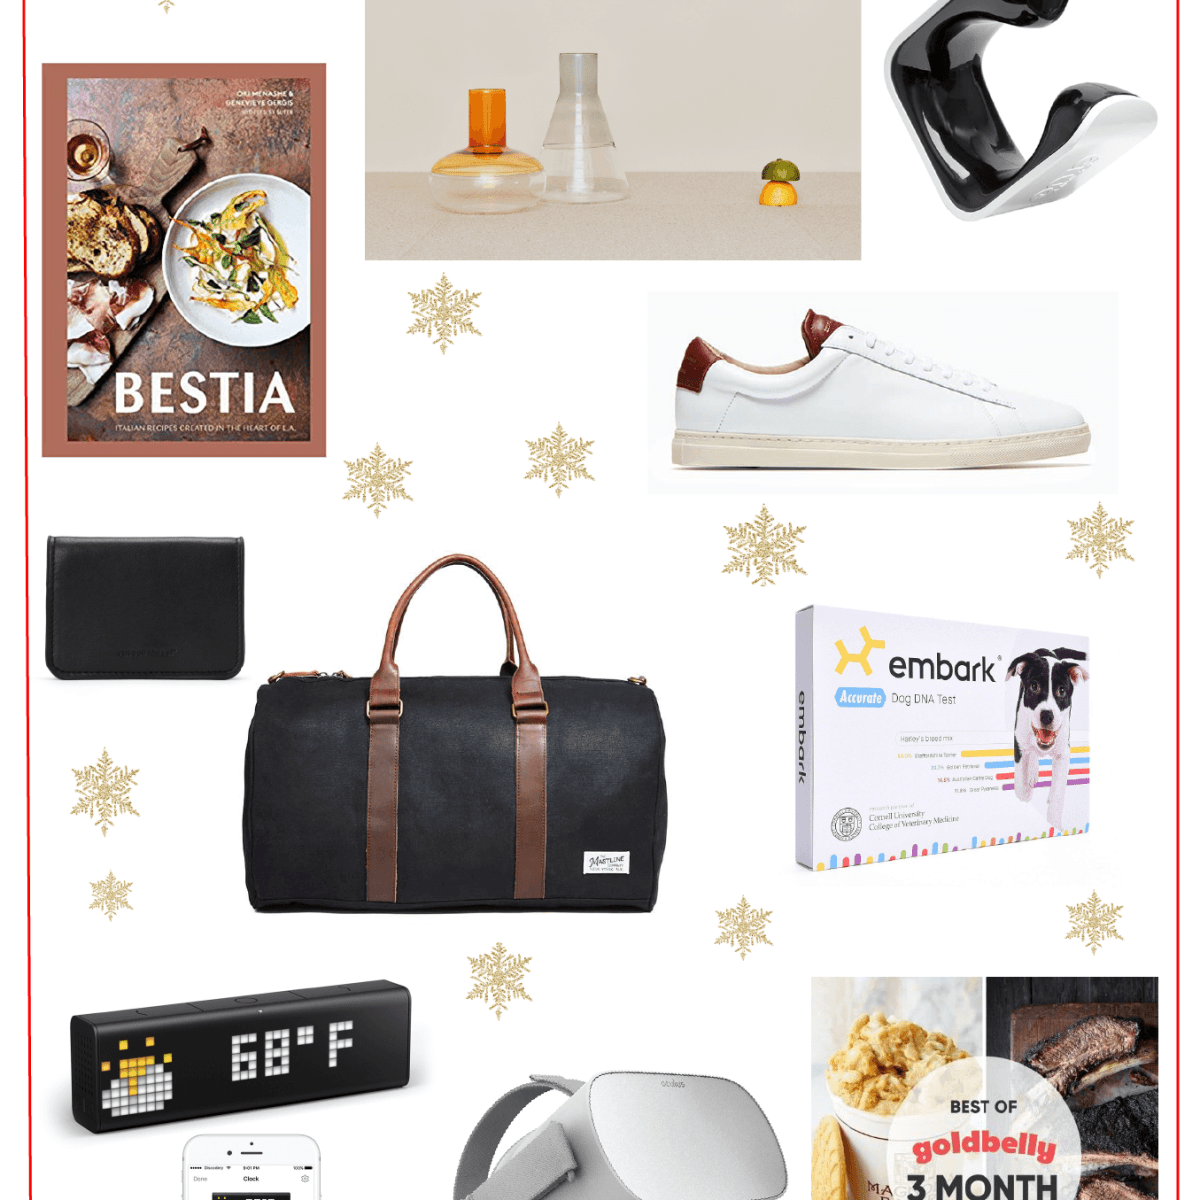 GIFT GUIDE: FOR HIM - The Kitchy Kitchen